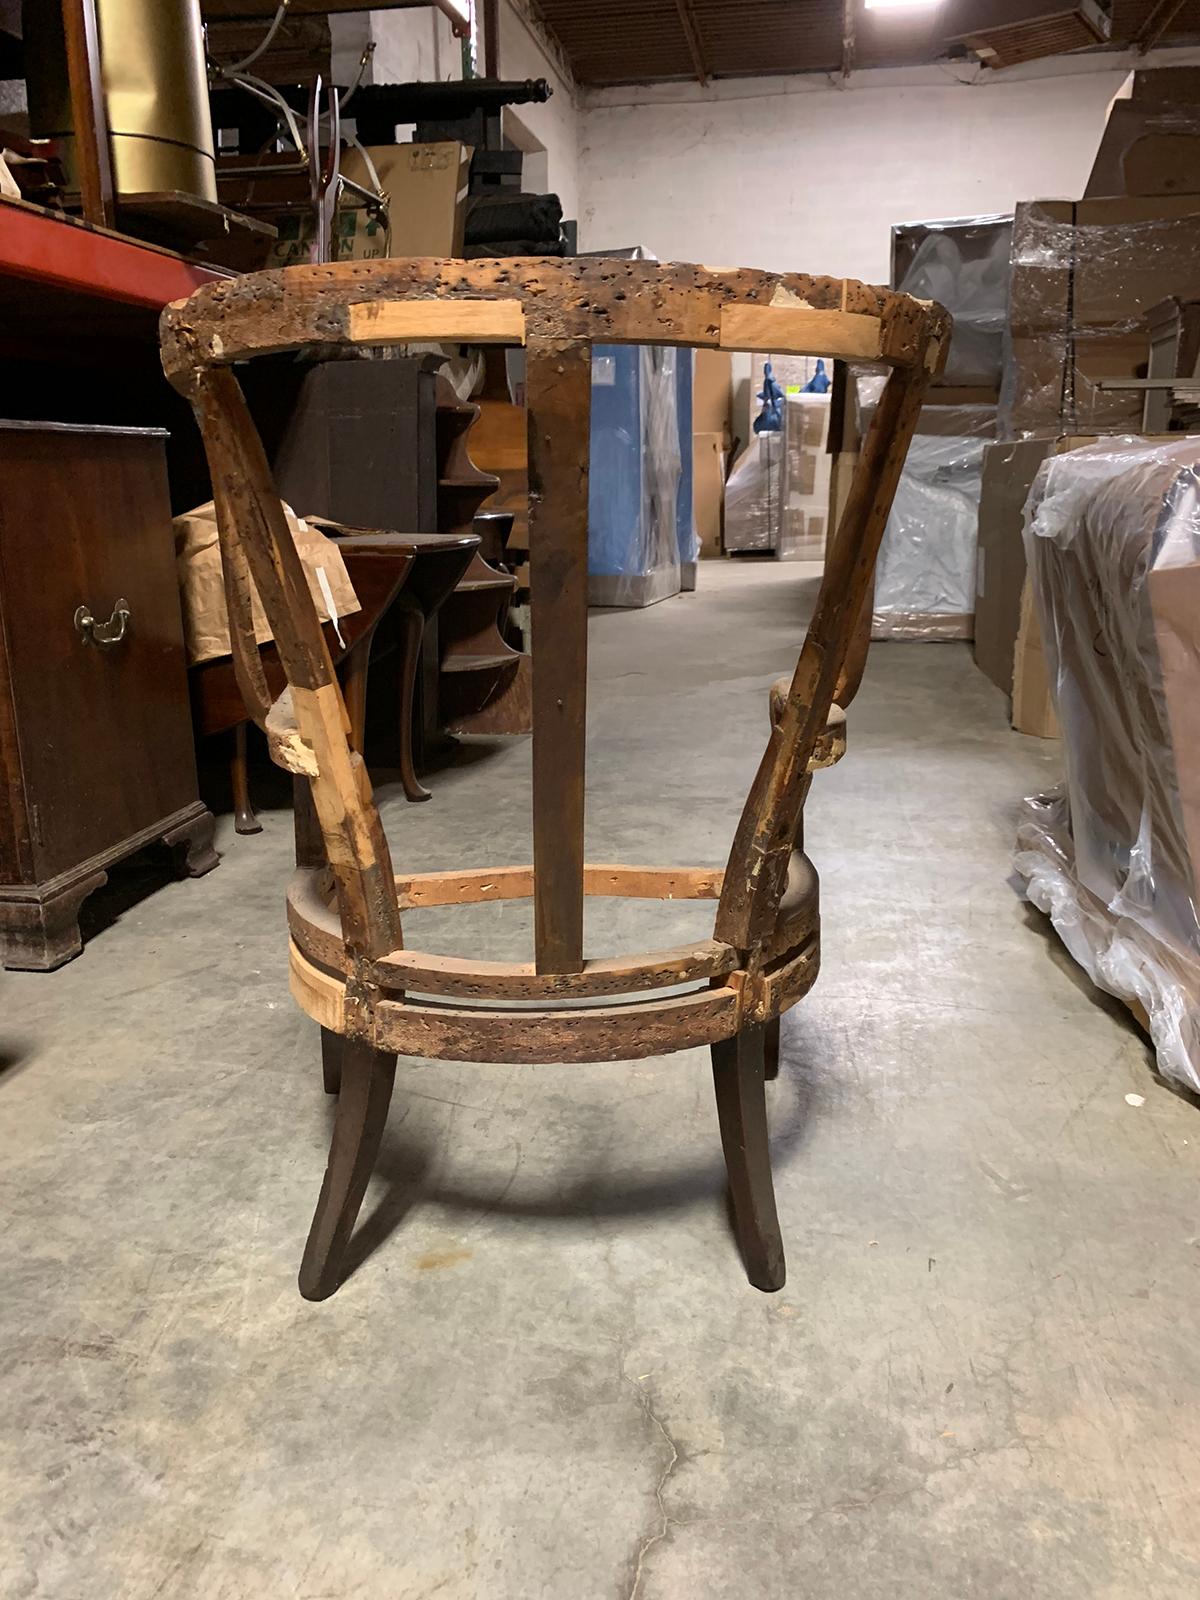 Large Scale 18th-19th Century English Barrel Wingback Chair Frame For Sale 1